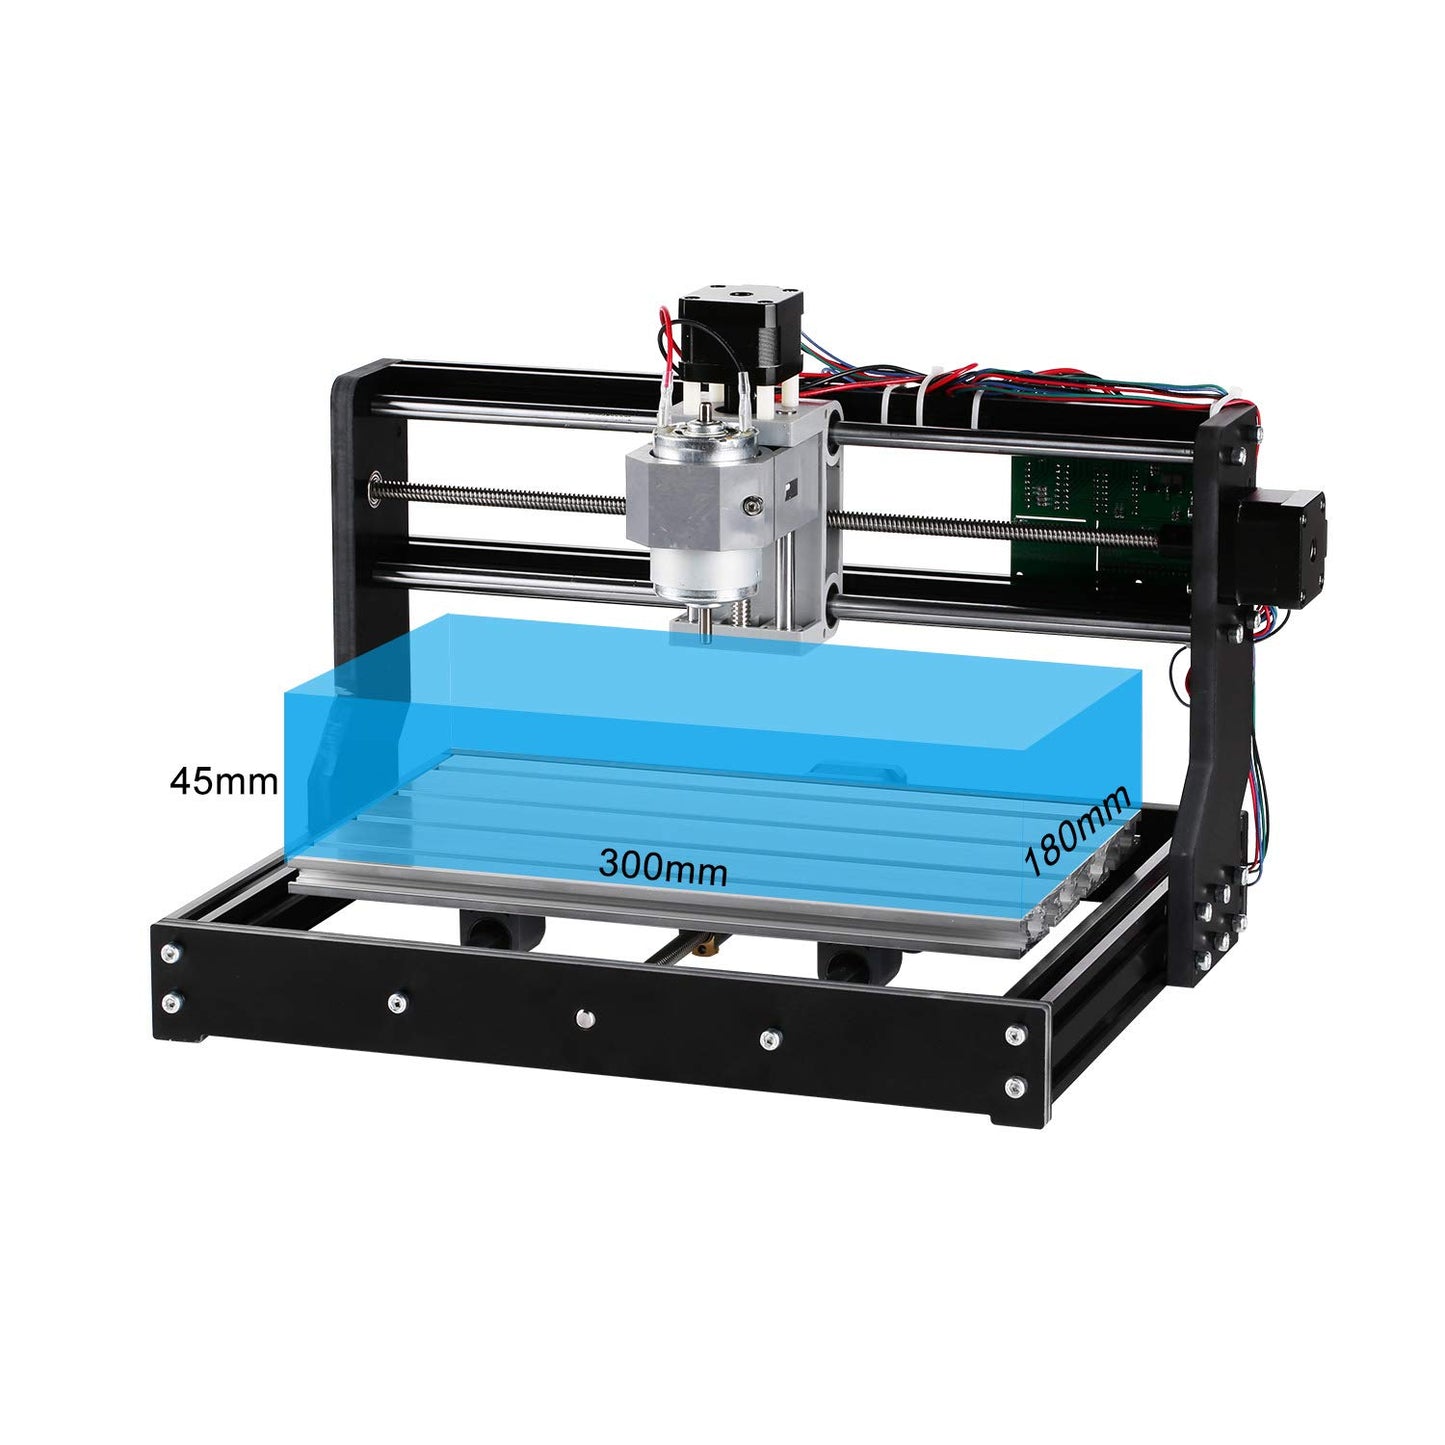 the working size of  iklestar cnc router 3018-pro is 300*180*45 mm